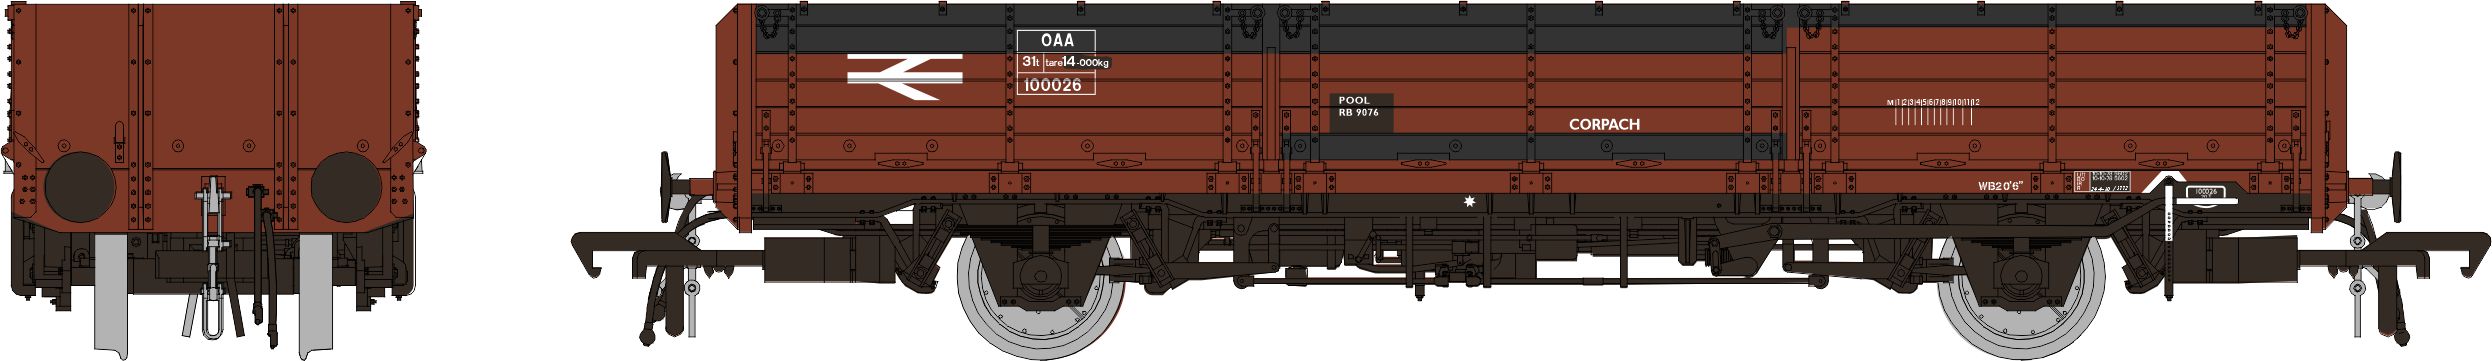 Rapido 915007 OAA Open Wagon BR Bauxite Corpach Pool Patched Finish No.100026, OO Gauge